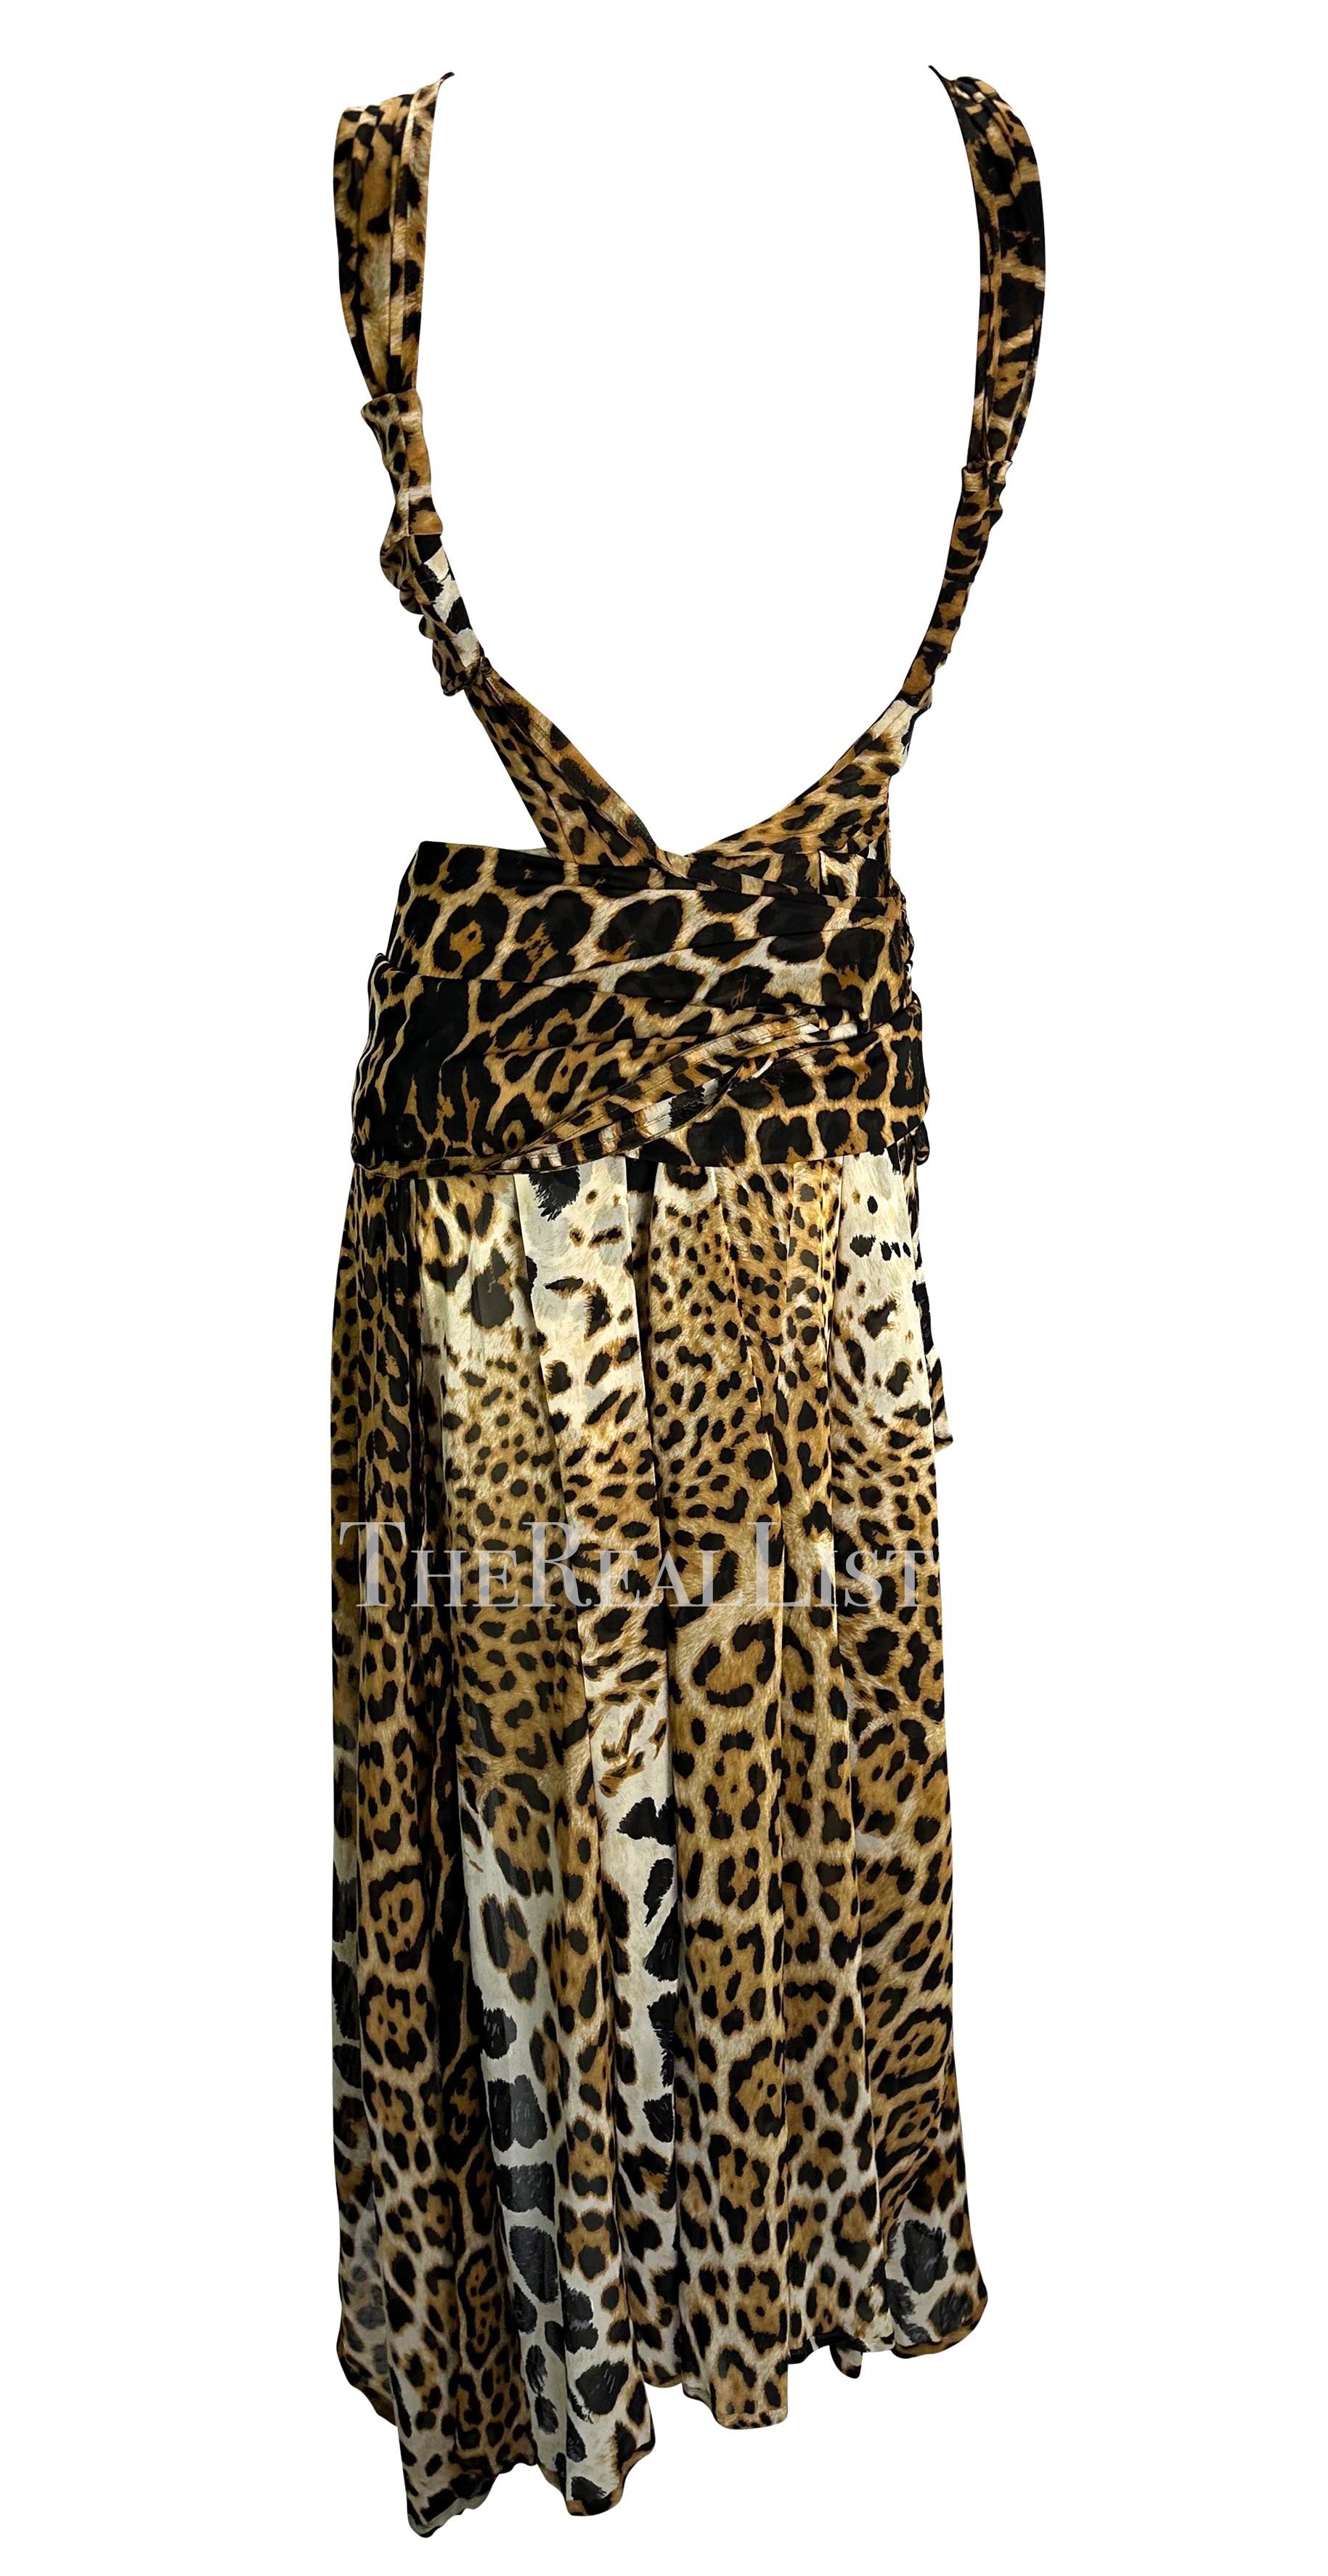 S/S 2002 Yves Saint Laurent by Tom Ford Runway Cheetah Print Chiffon Wrap Gown For Sale 7